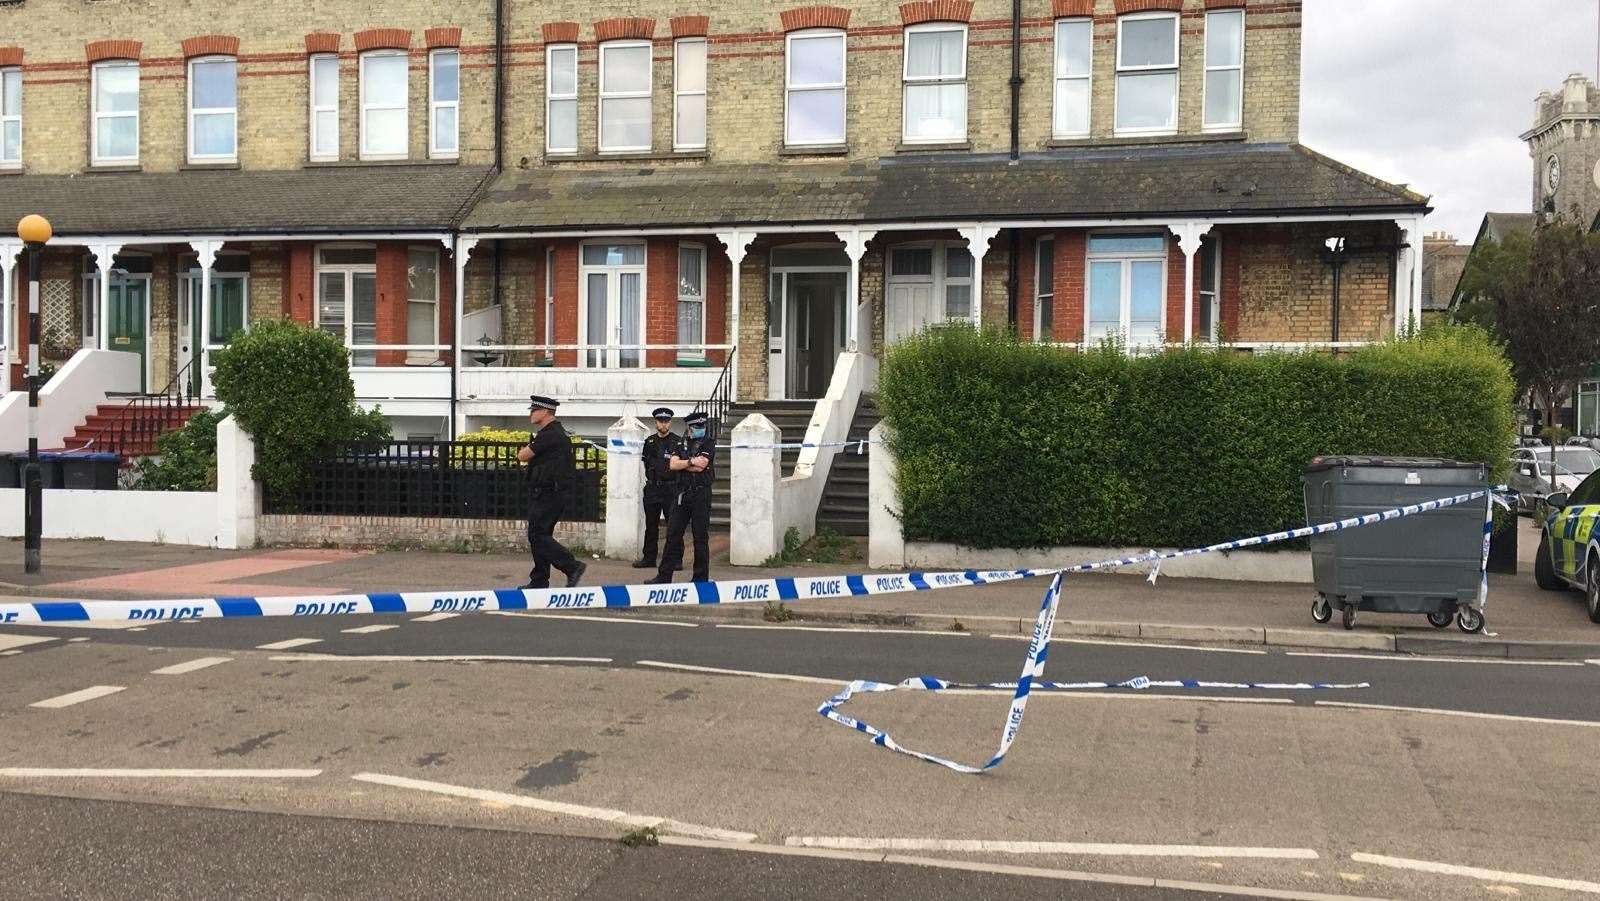 Police have taped off the area. Picture: Joe Coshan